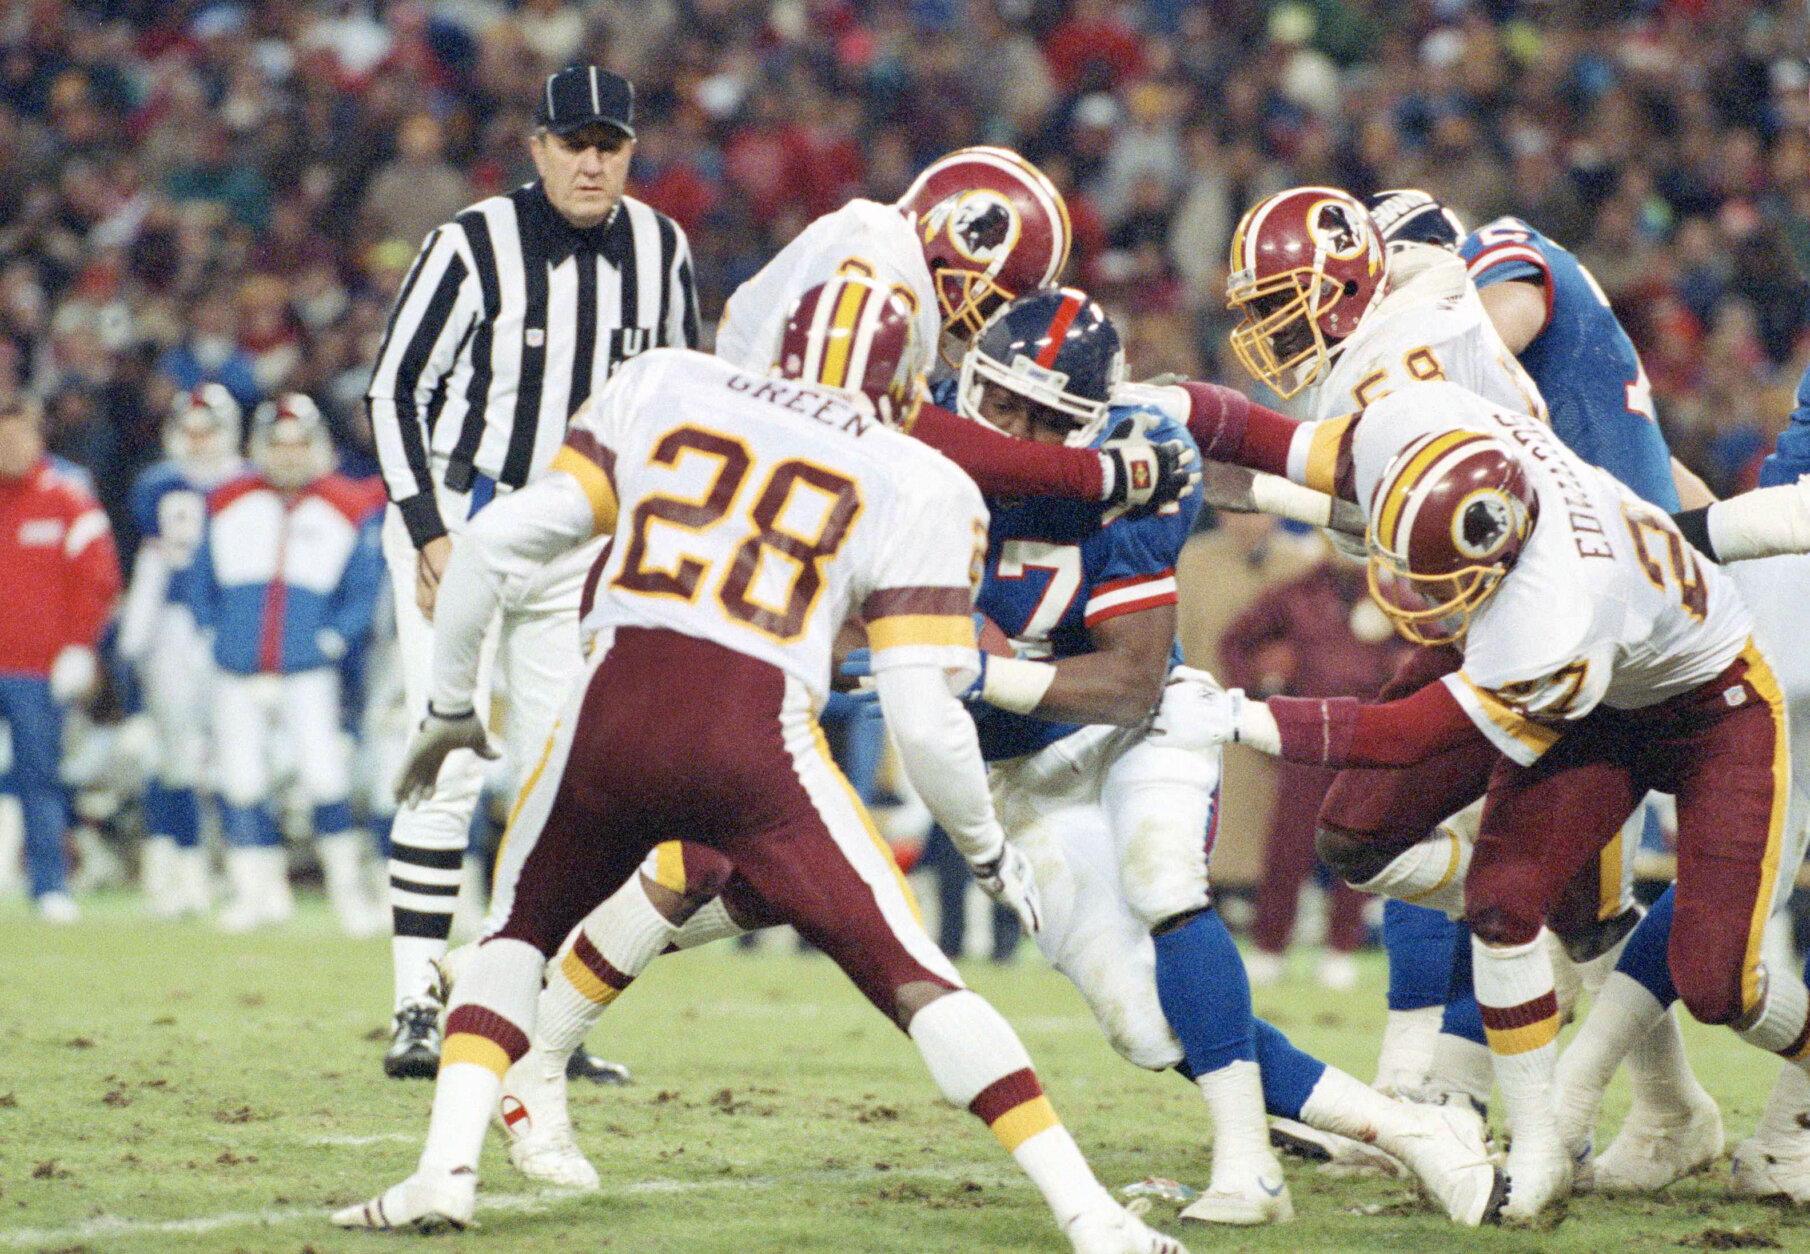 <p>Week 9 — Oct. 27, 1991</p>
<p><em><strong>Washington 17</strong></em><br />
<em><strong>NY Giants 13</strong></em></p>
<p>Record: 8-0</p>
<p>Washington erased a 13-0 first-half deficit in prime-time to finally beat the defending champion Giants, who had won the previous six meetings between these division rivals.</p>
